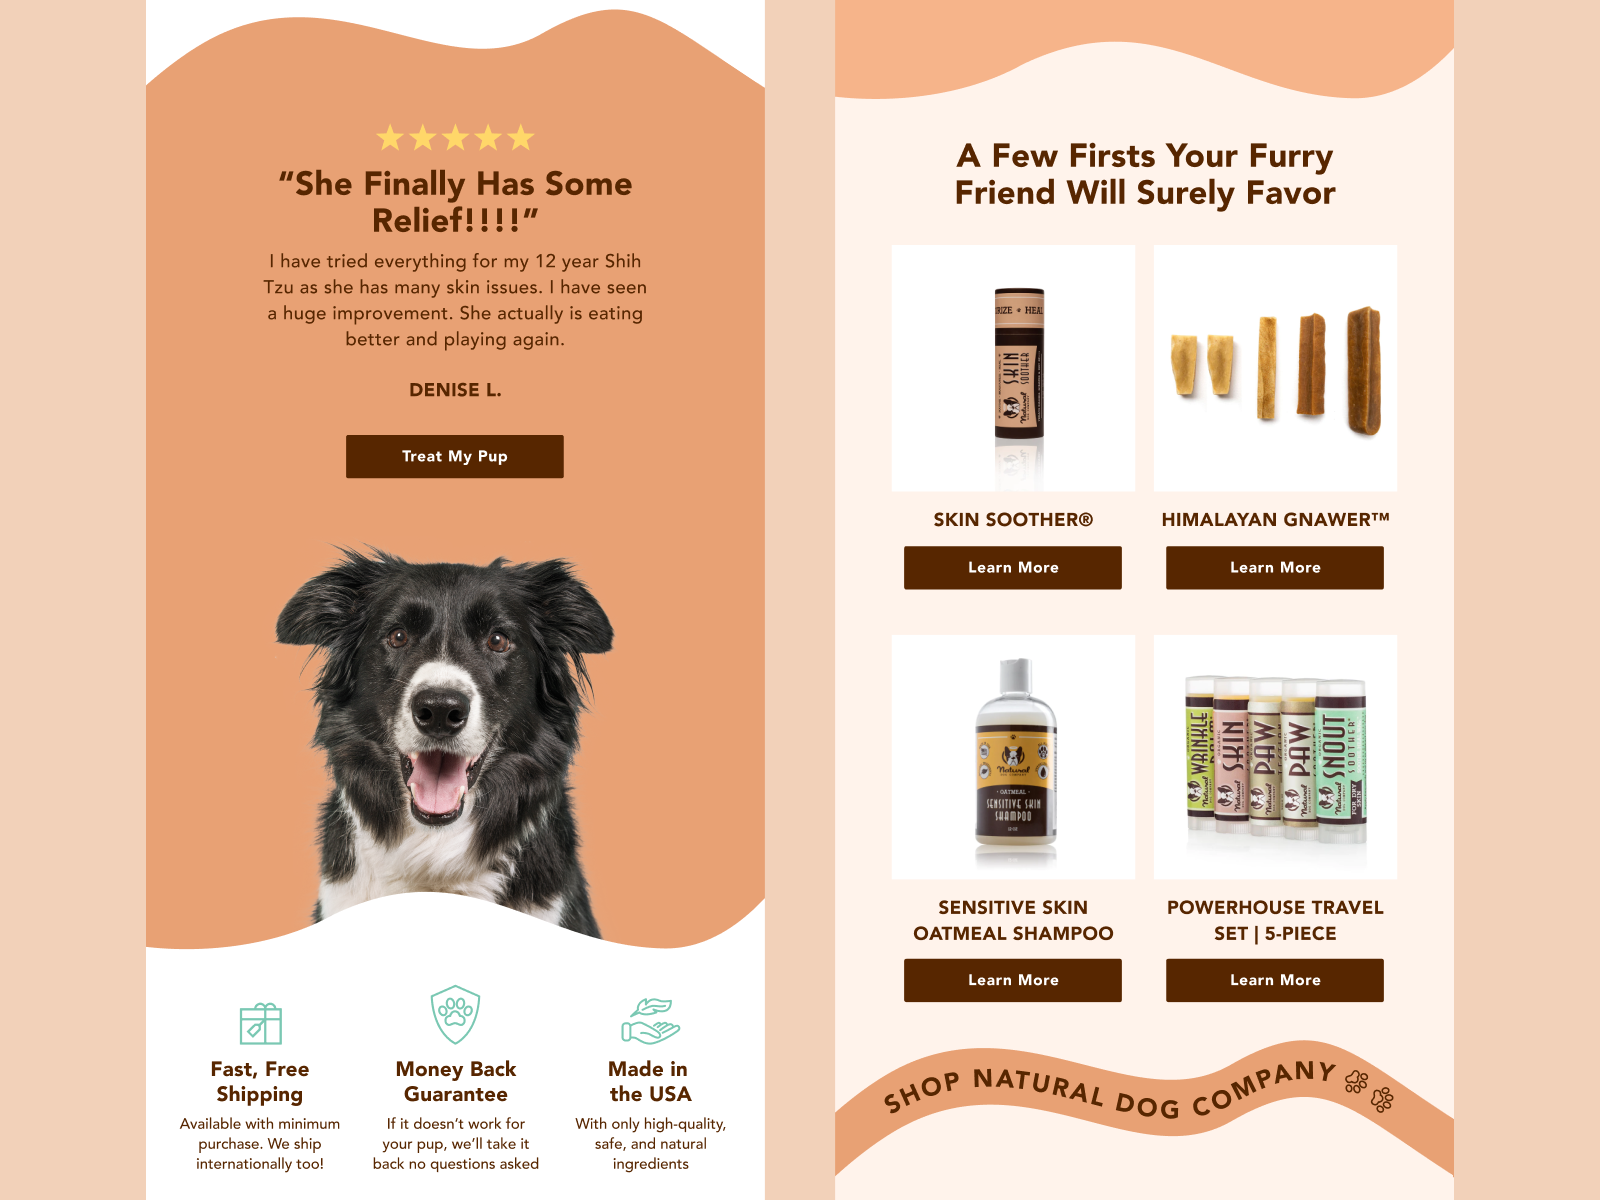 Screenshots of email campaigns from Natural Dog Company